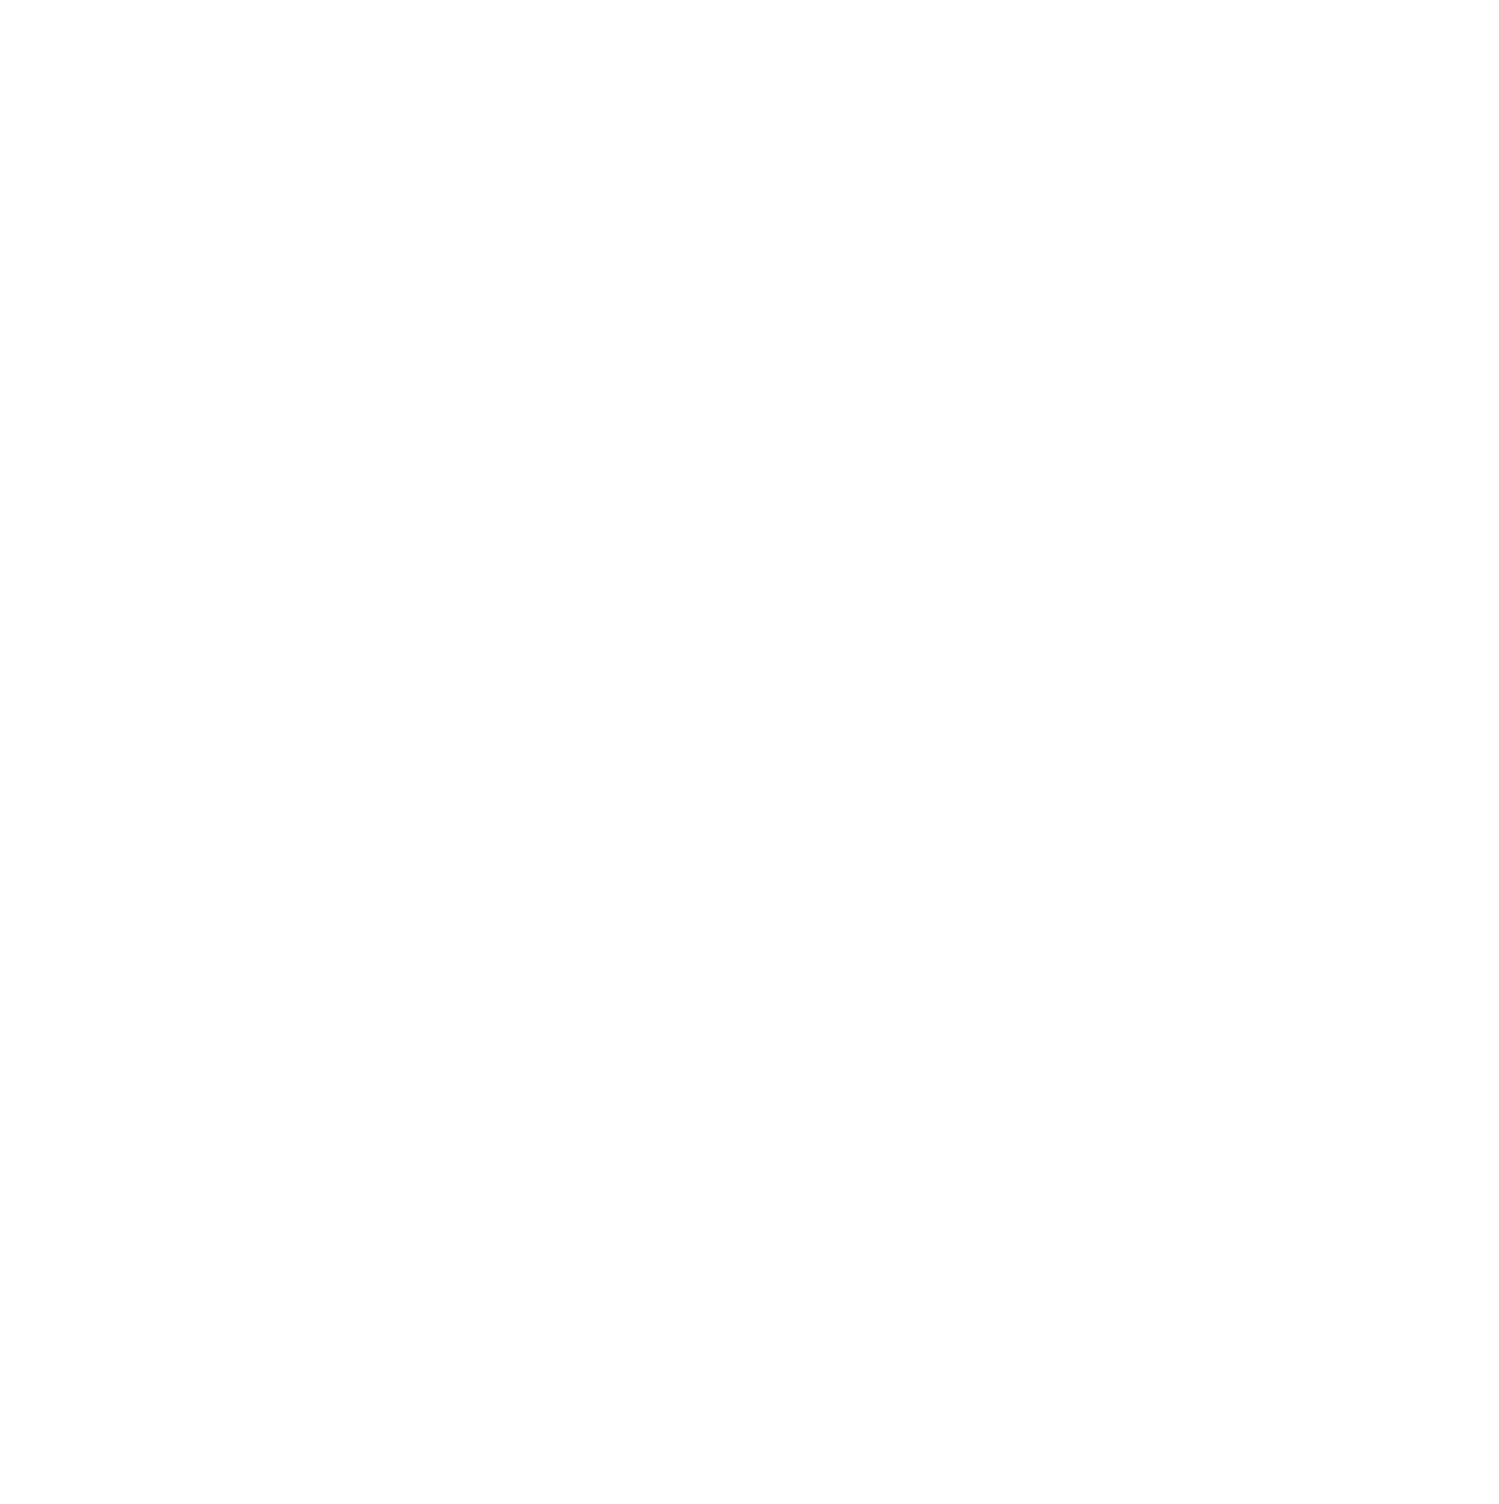 American Water Works logo for dark backgrounds (transparent PNG)